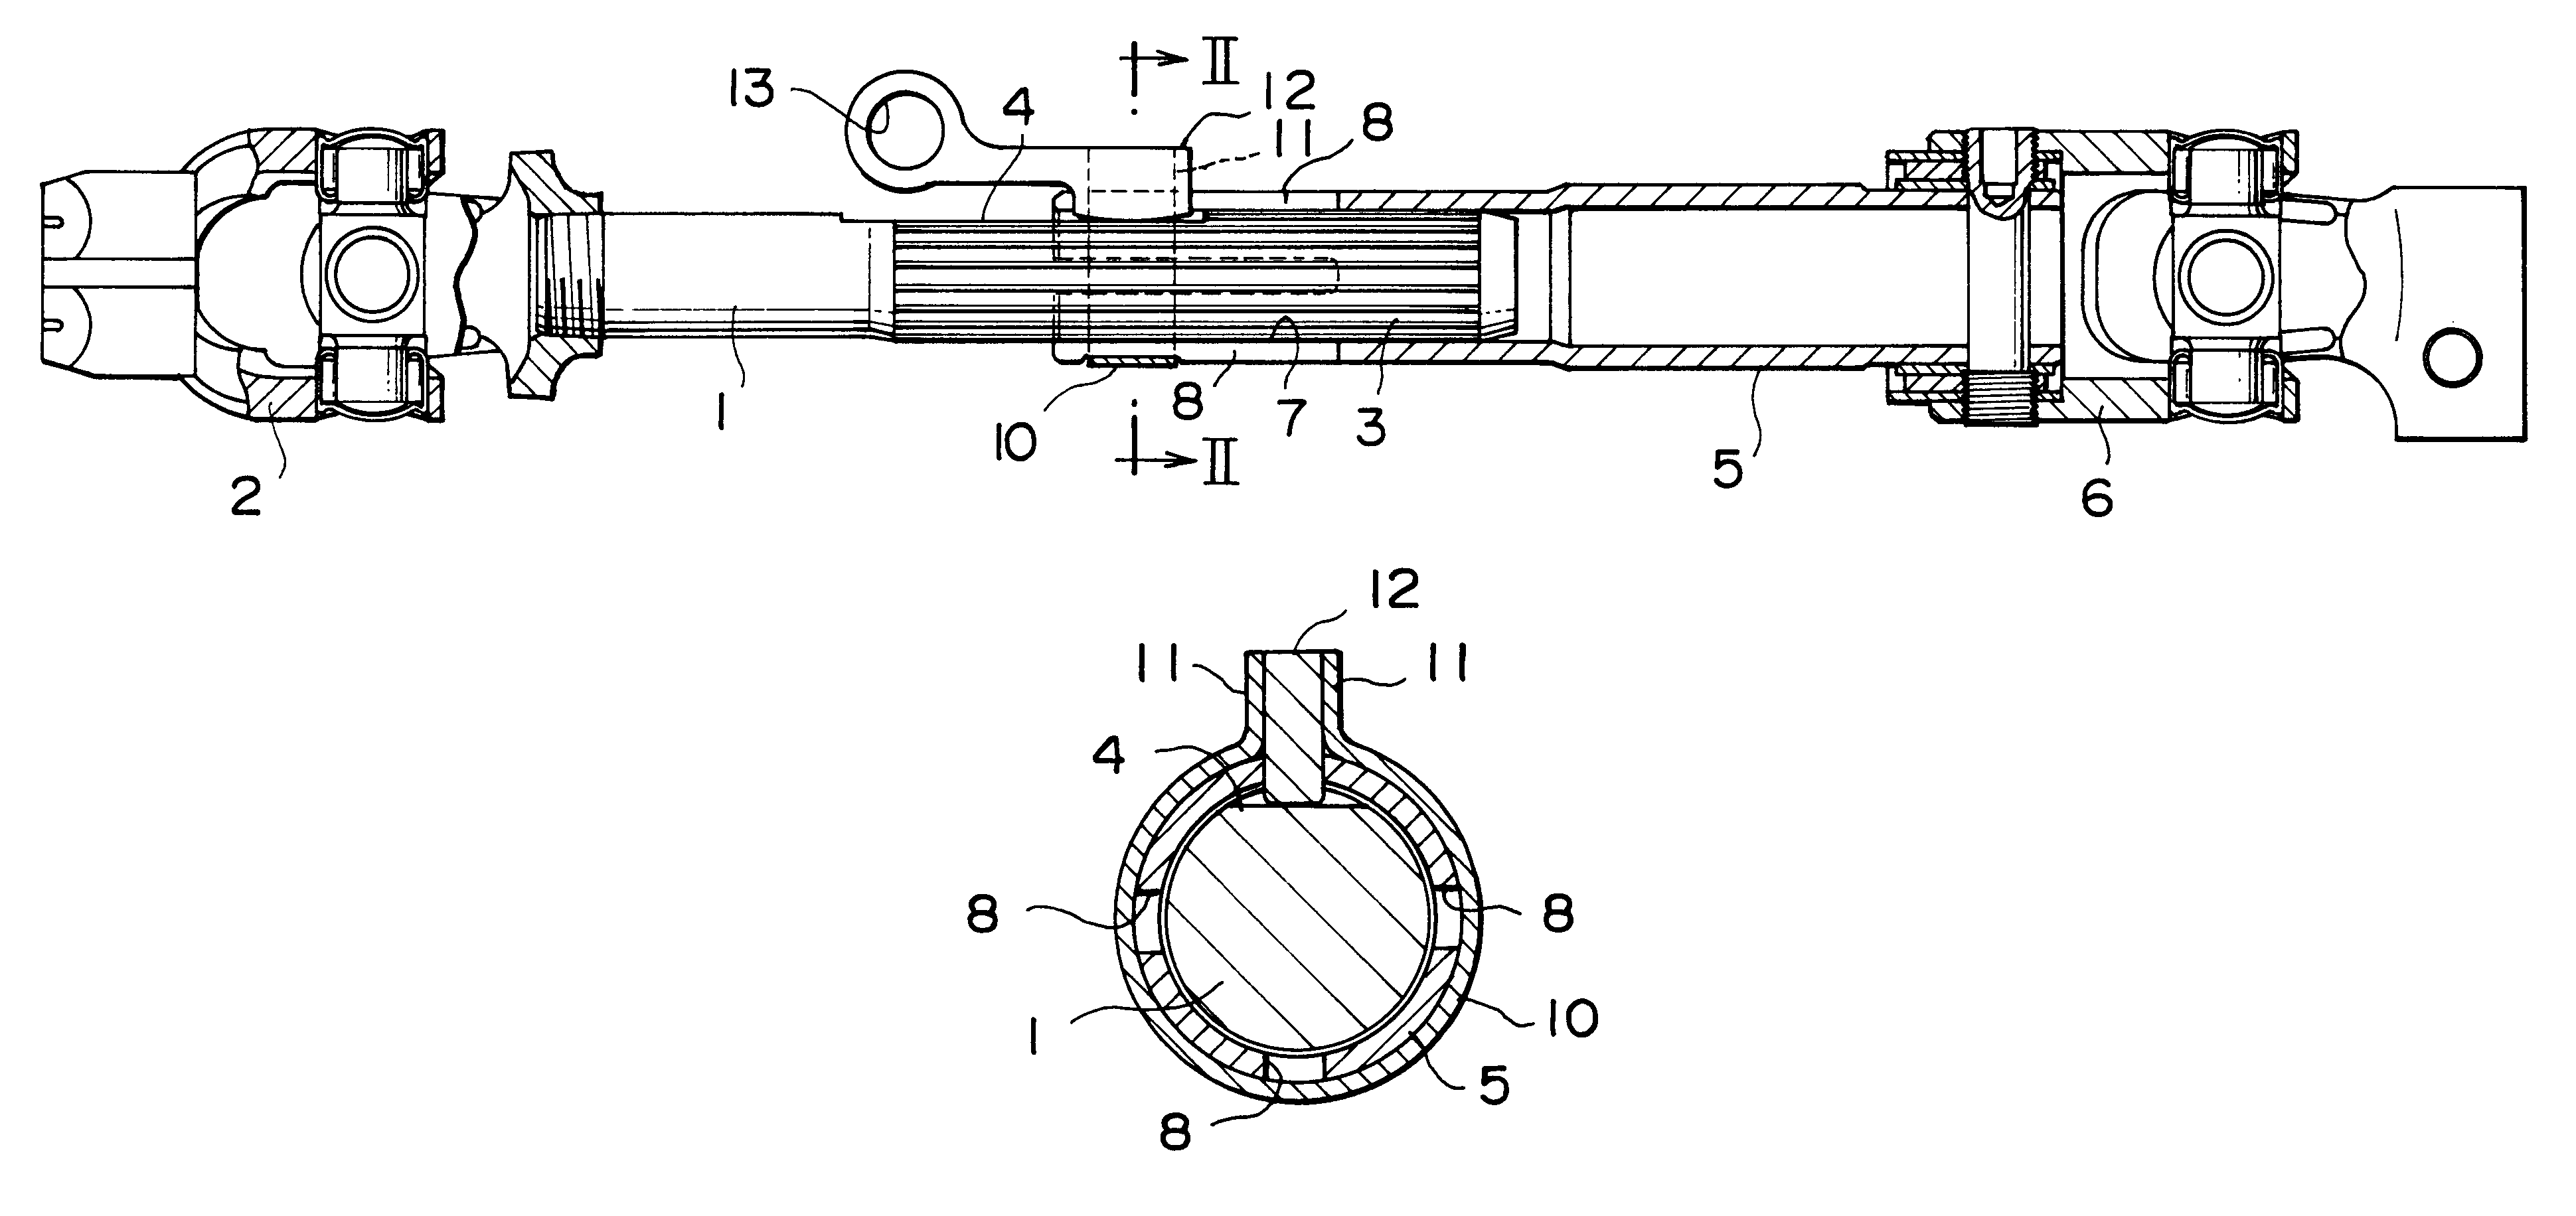 Coupling structure of variable length shaft